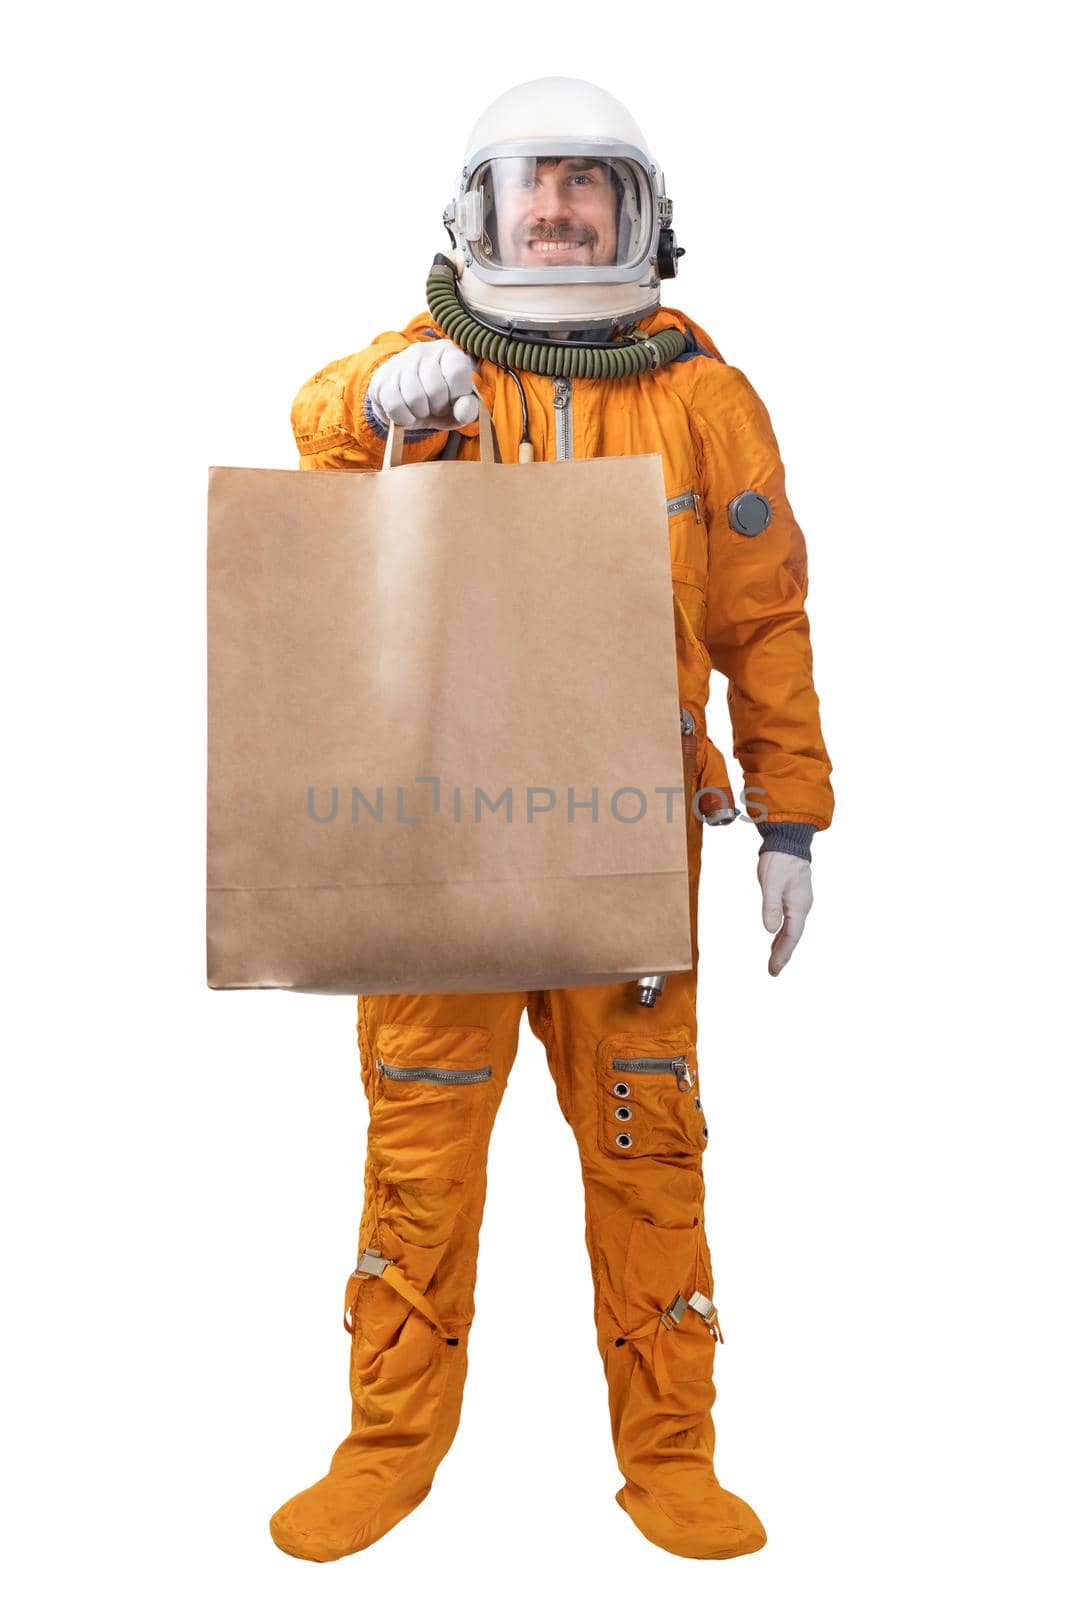 Happy astronaut wearing orange space suit and space helmet holding in hand blank kraft paper bag isolated on white background. Delivery concept. Astronaut courier concept